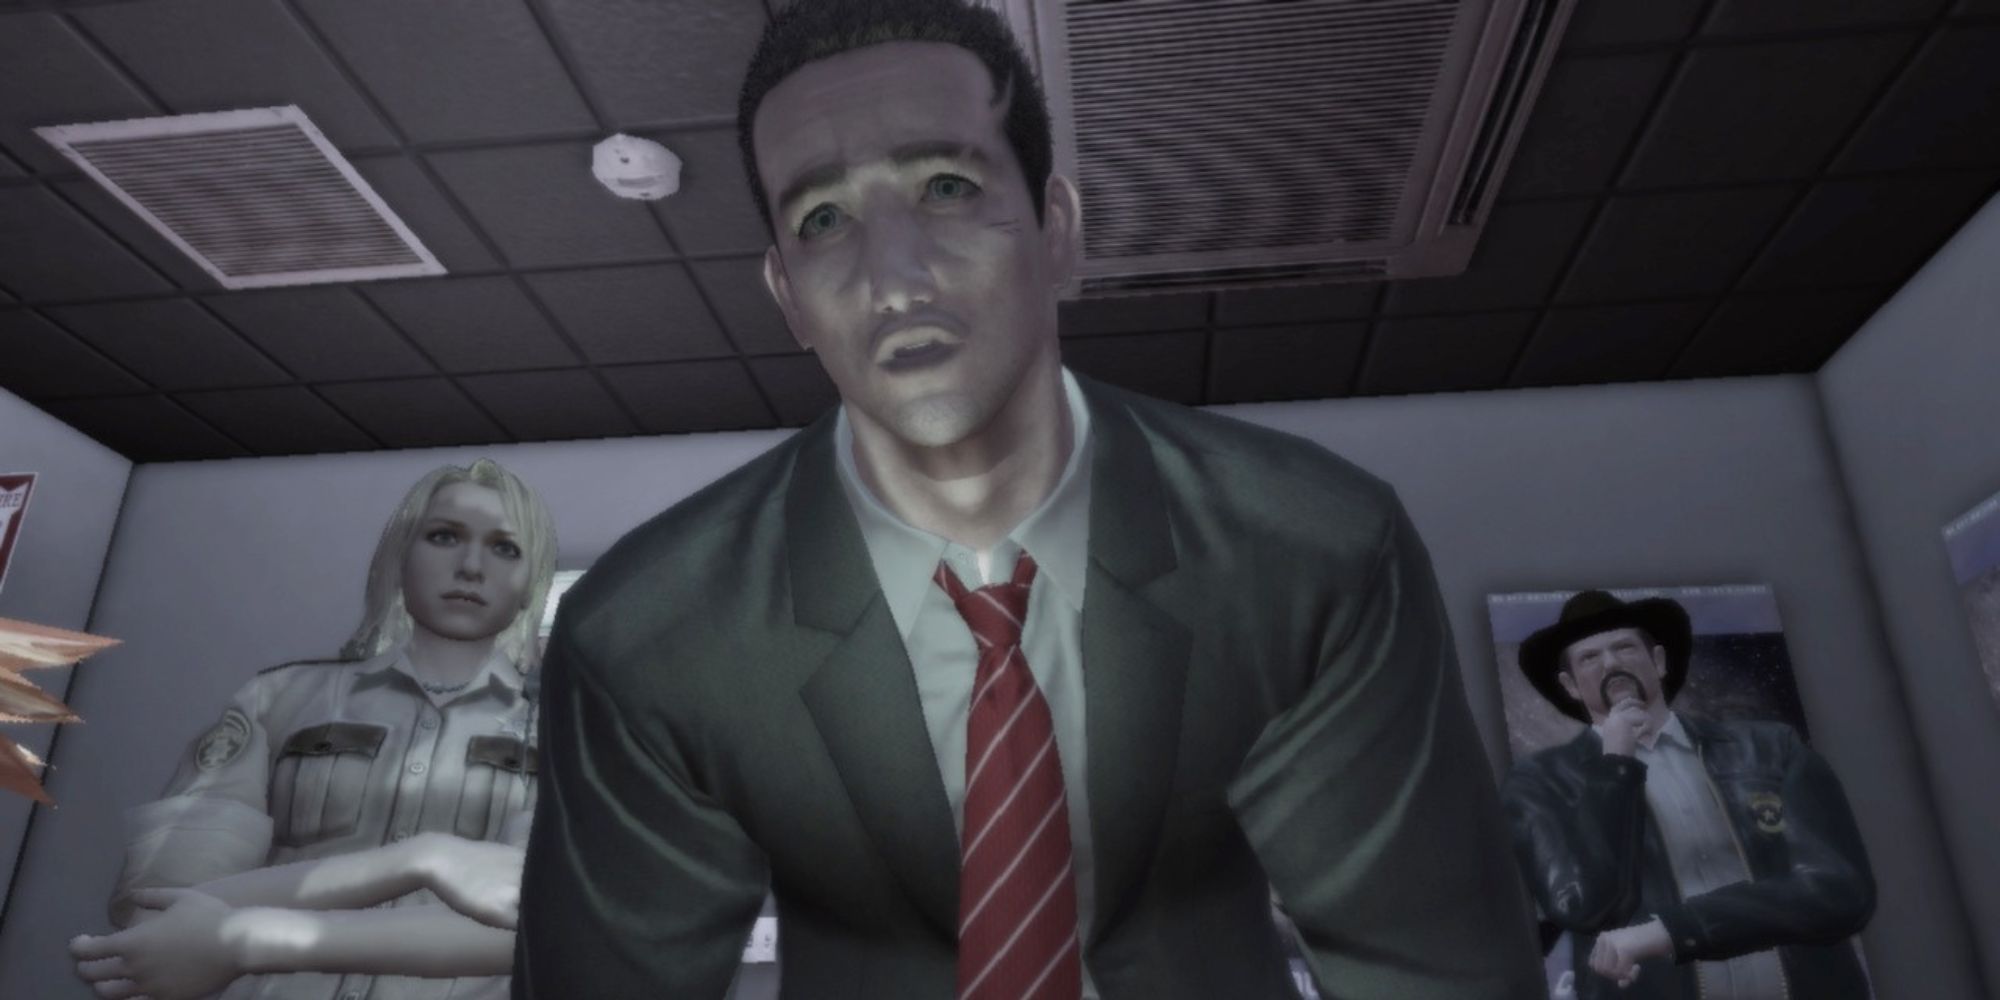 Francis York Morgan leans forward as Emily and George stand behind him in Deadly Premonition